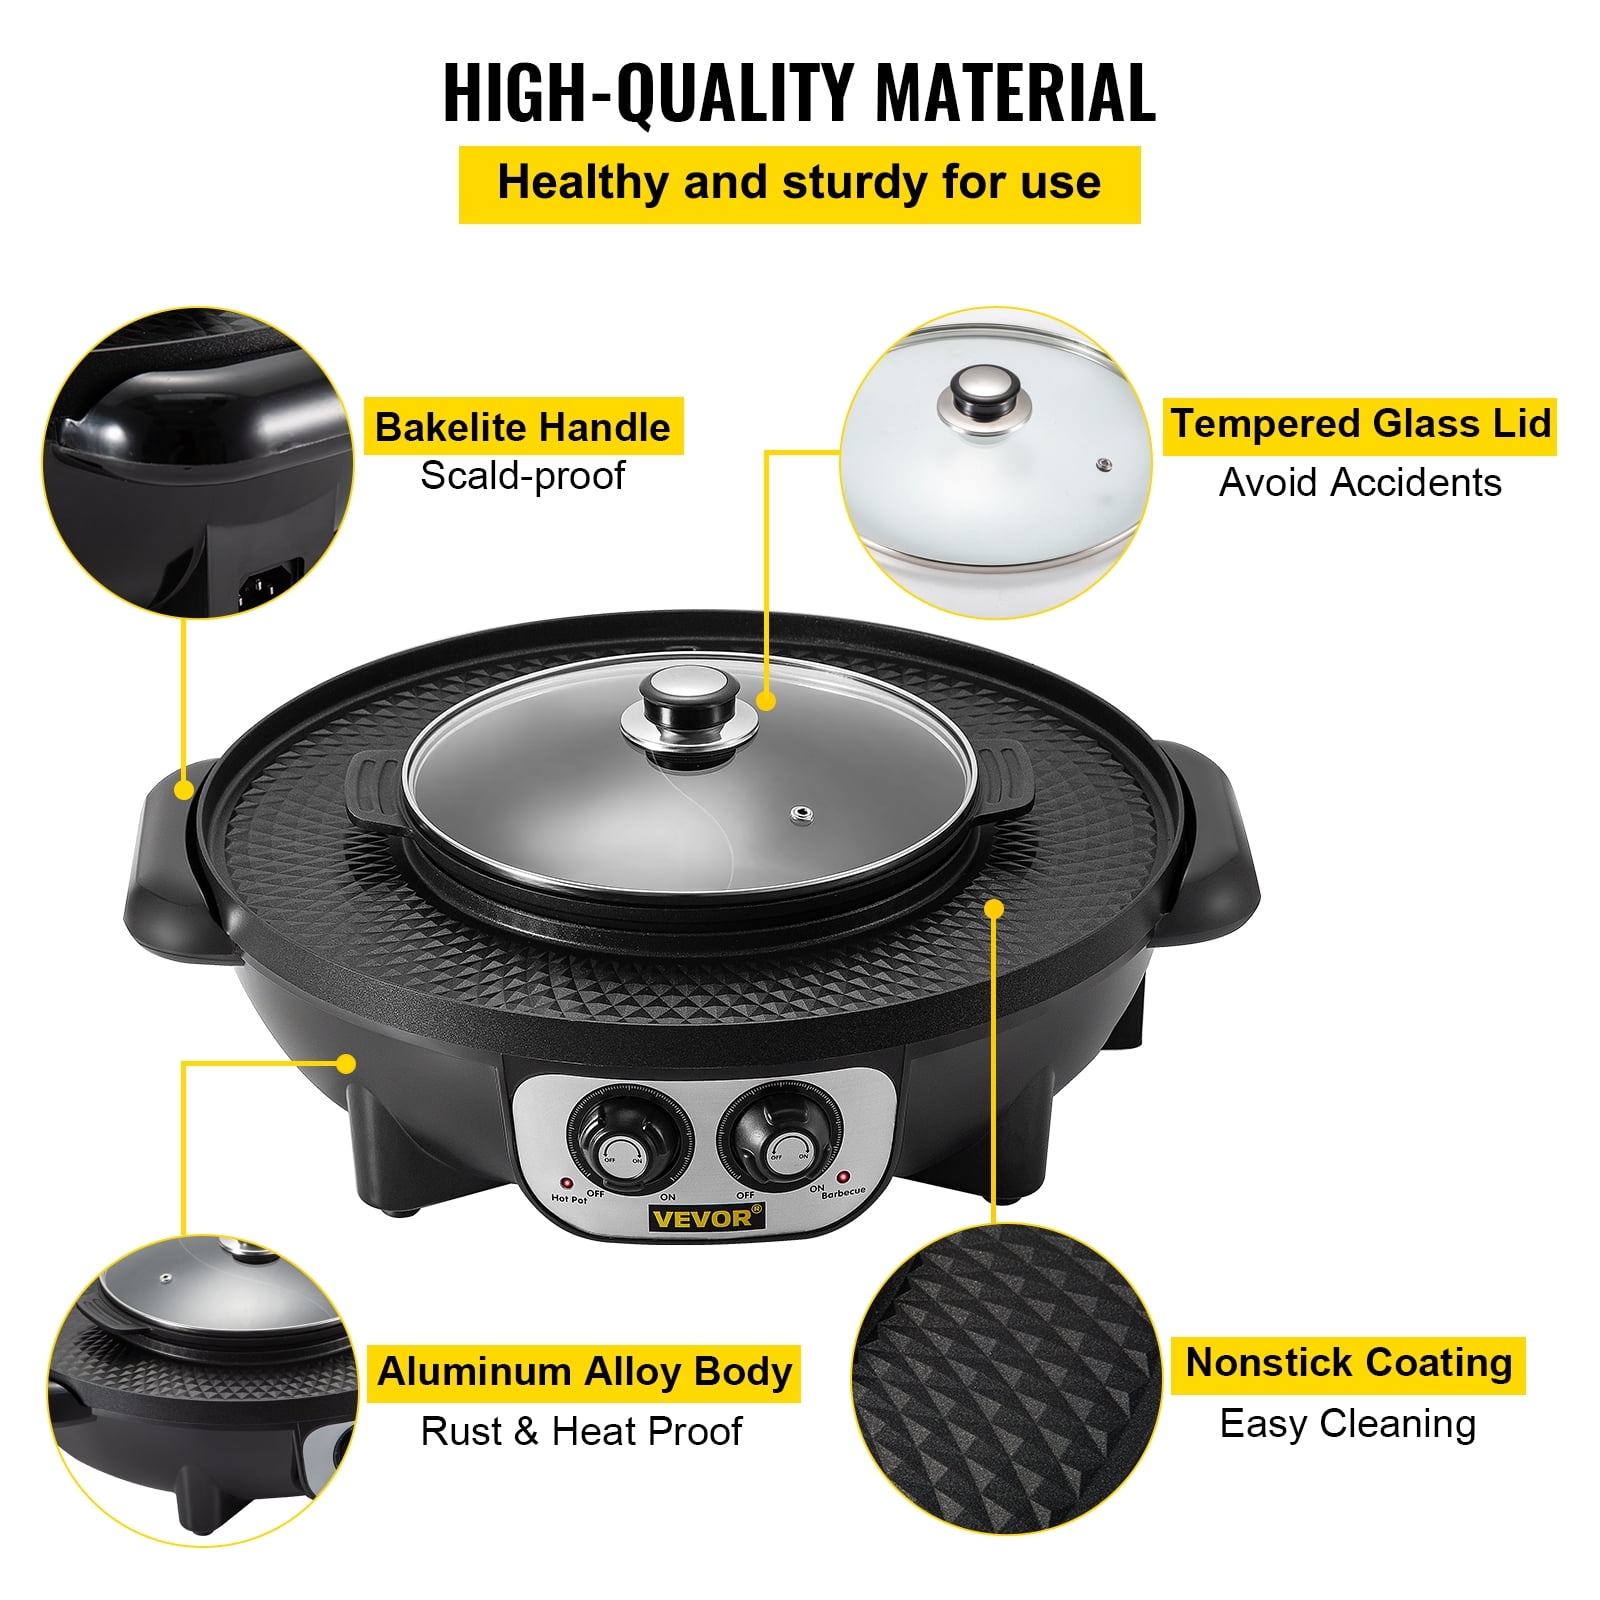 VEVOR 2 in 1 Electric Grill and Hot Pot BBQ Pan Grill and Hot Pot Smokeless  Hot Pot Grill with Dual Temp Control FTSJ2200W110VXOZEV1 - The Home Depot